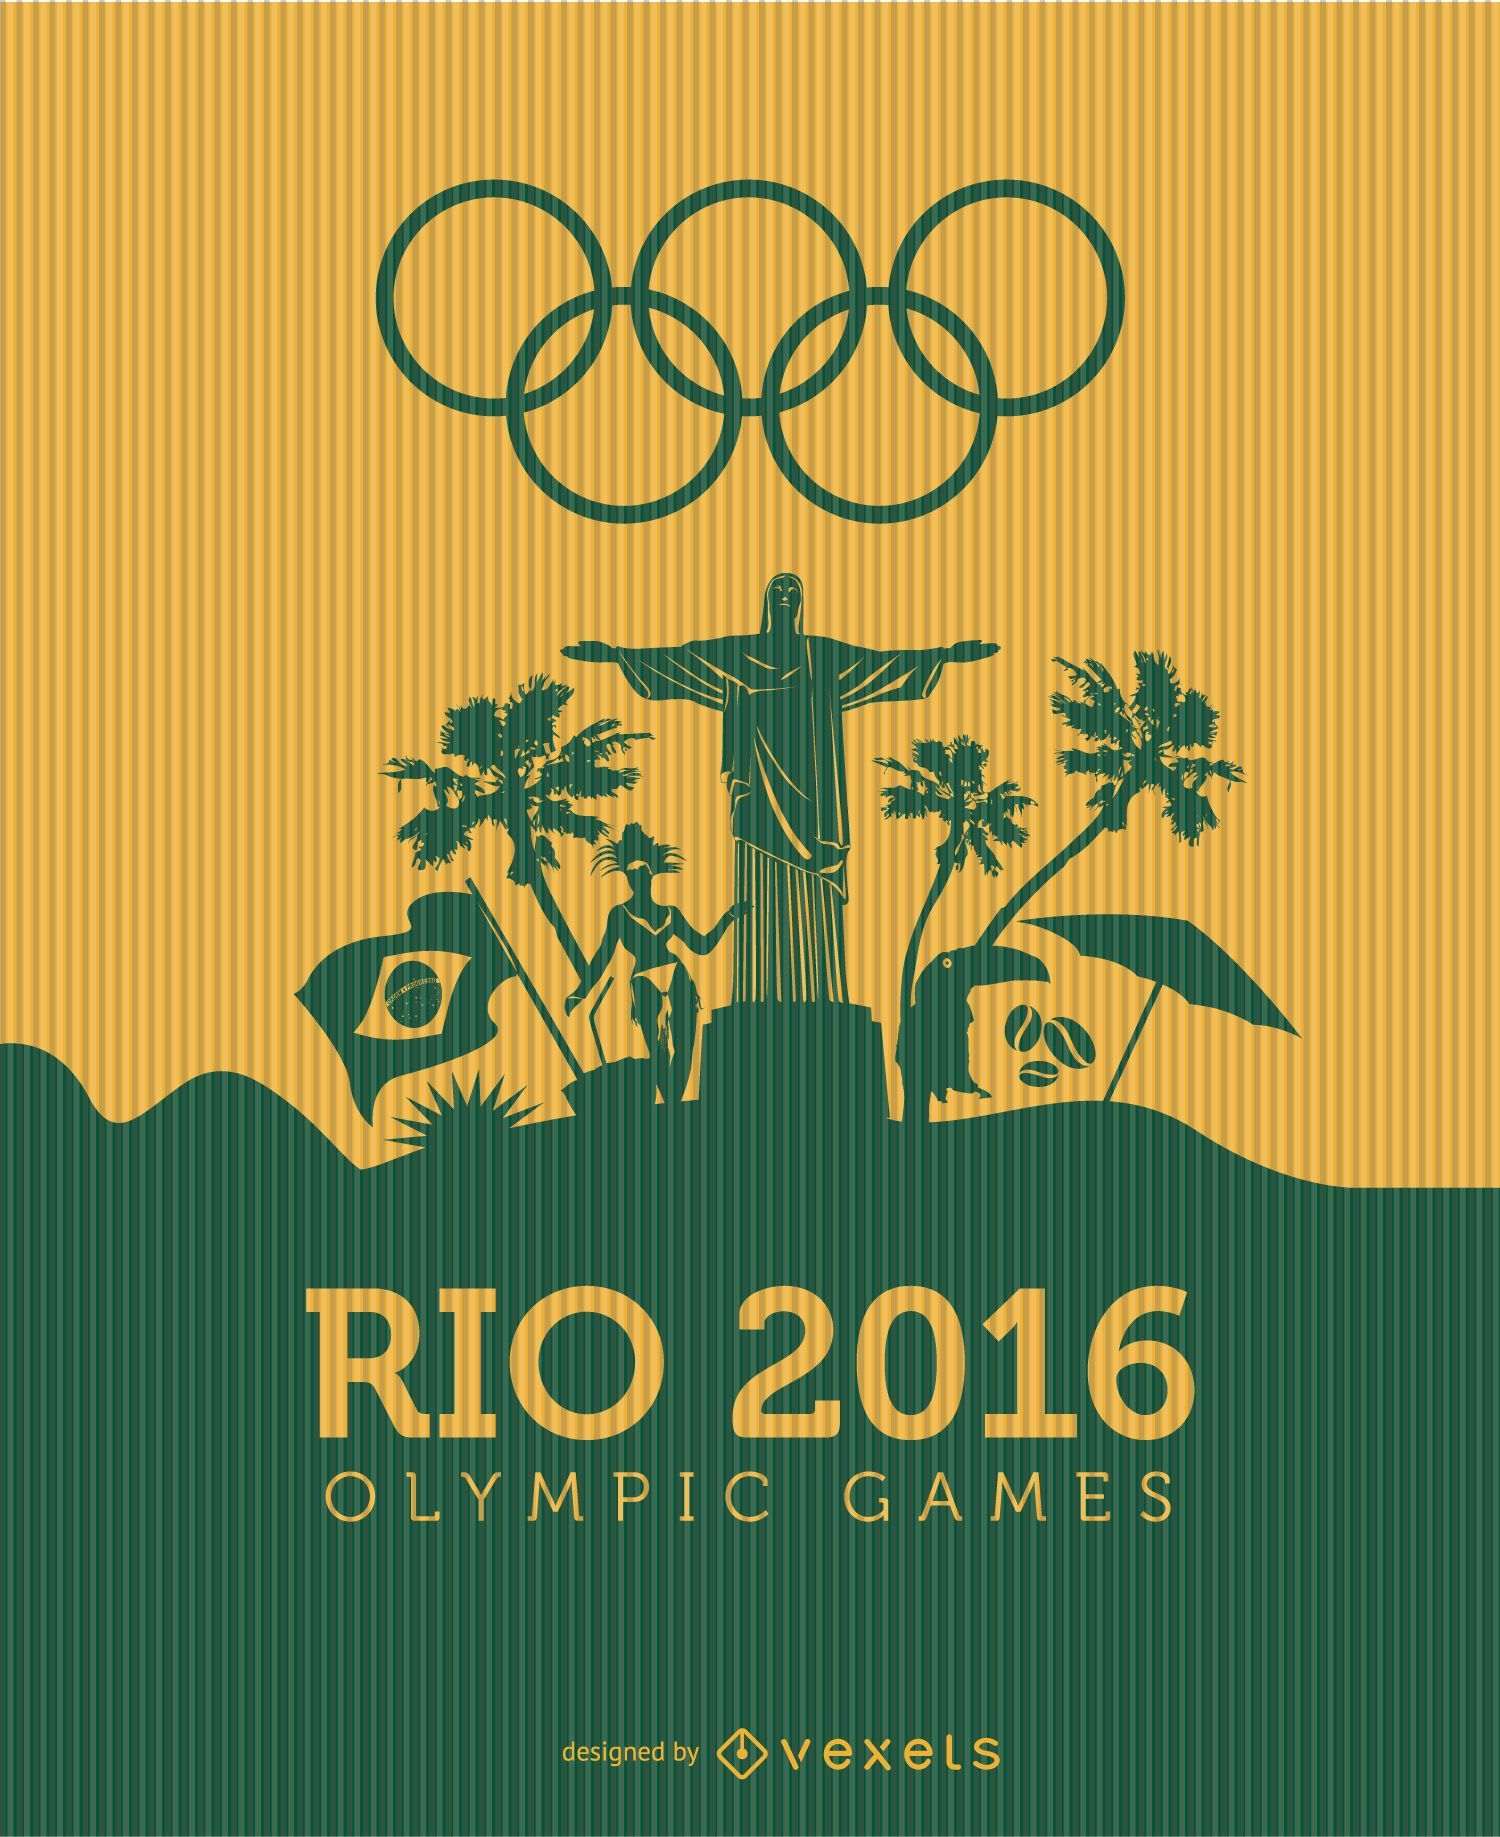 Rio 2016 Olympic games landscape